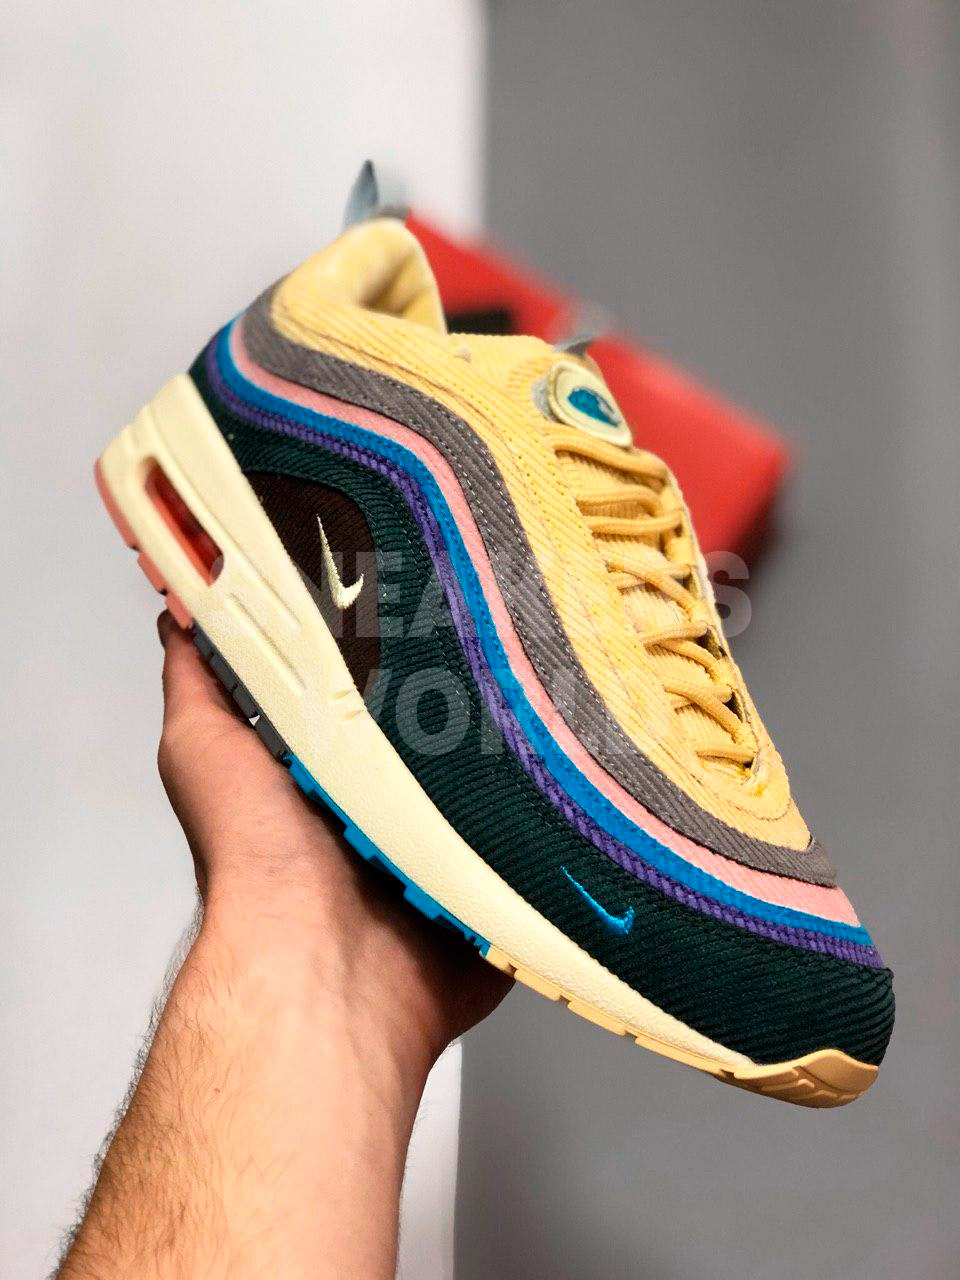 sean wotherspoon air max 2019